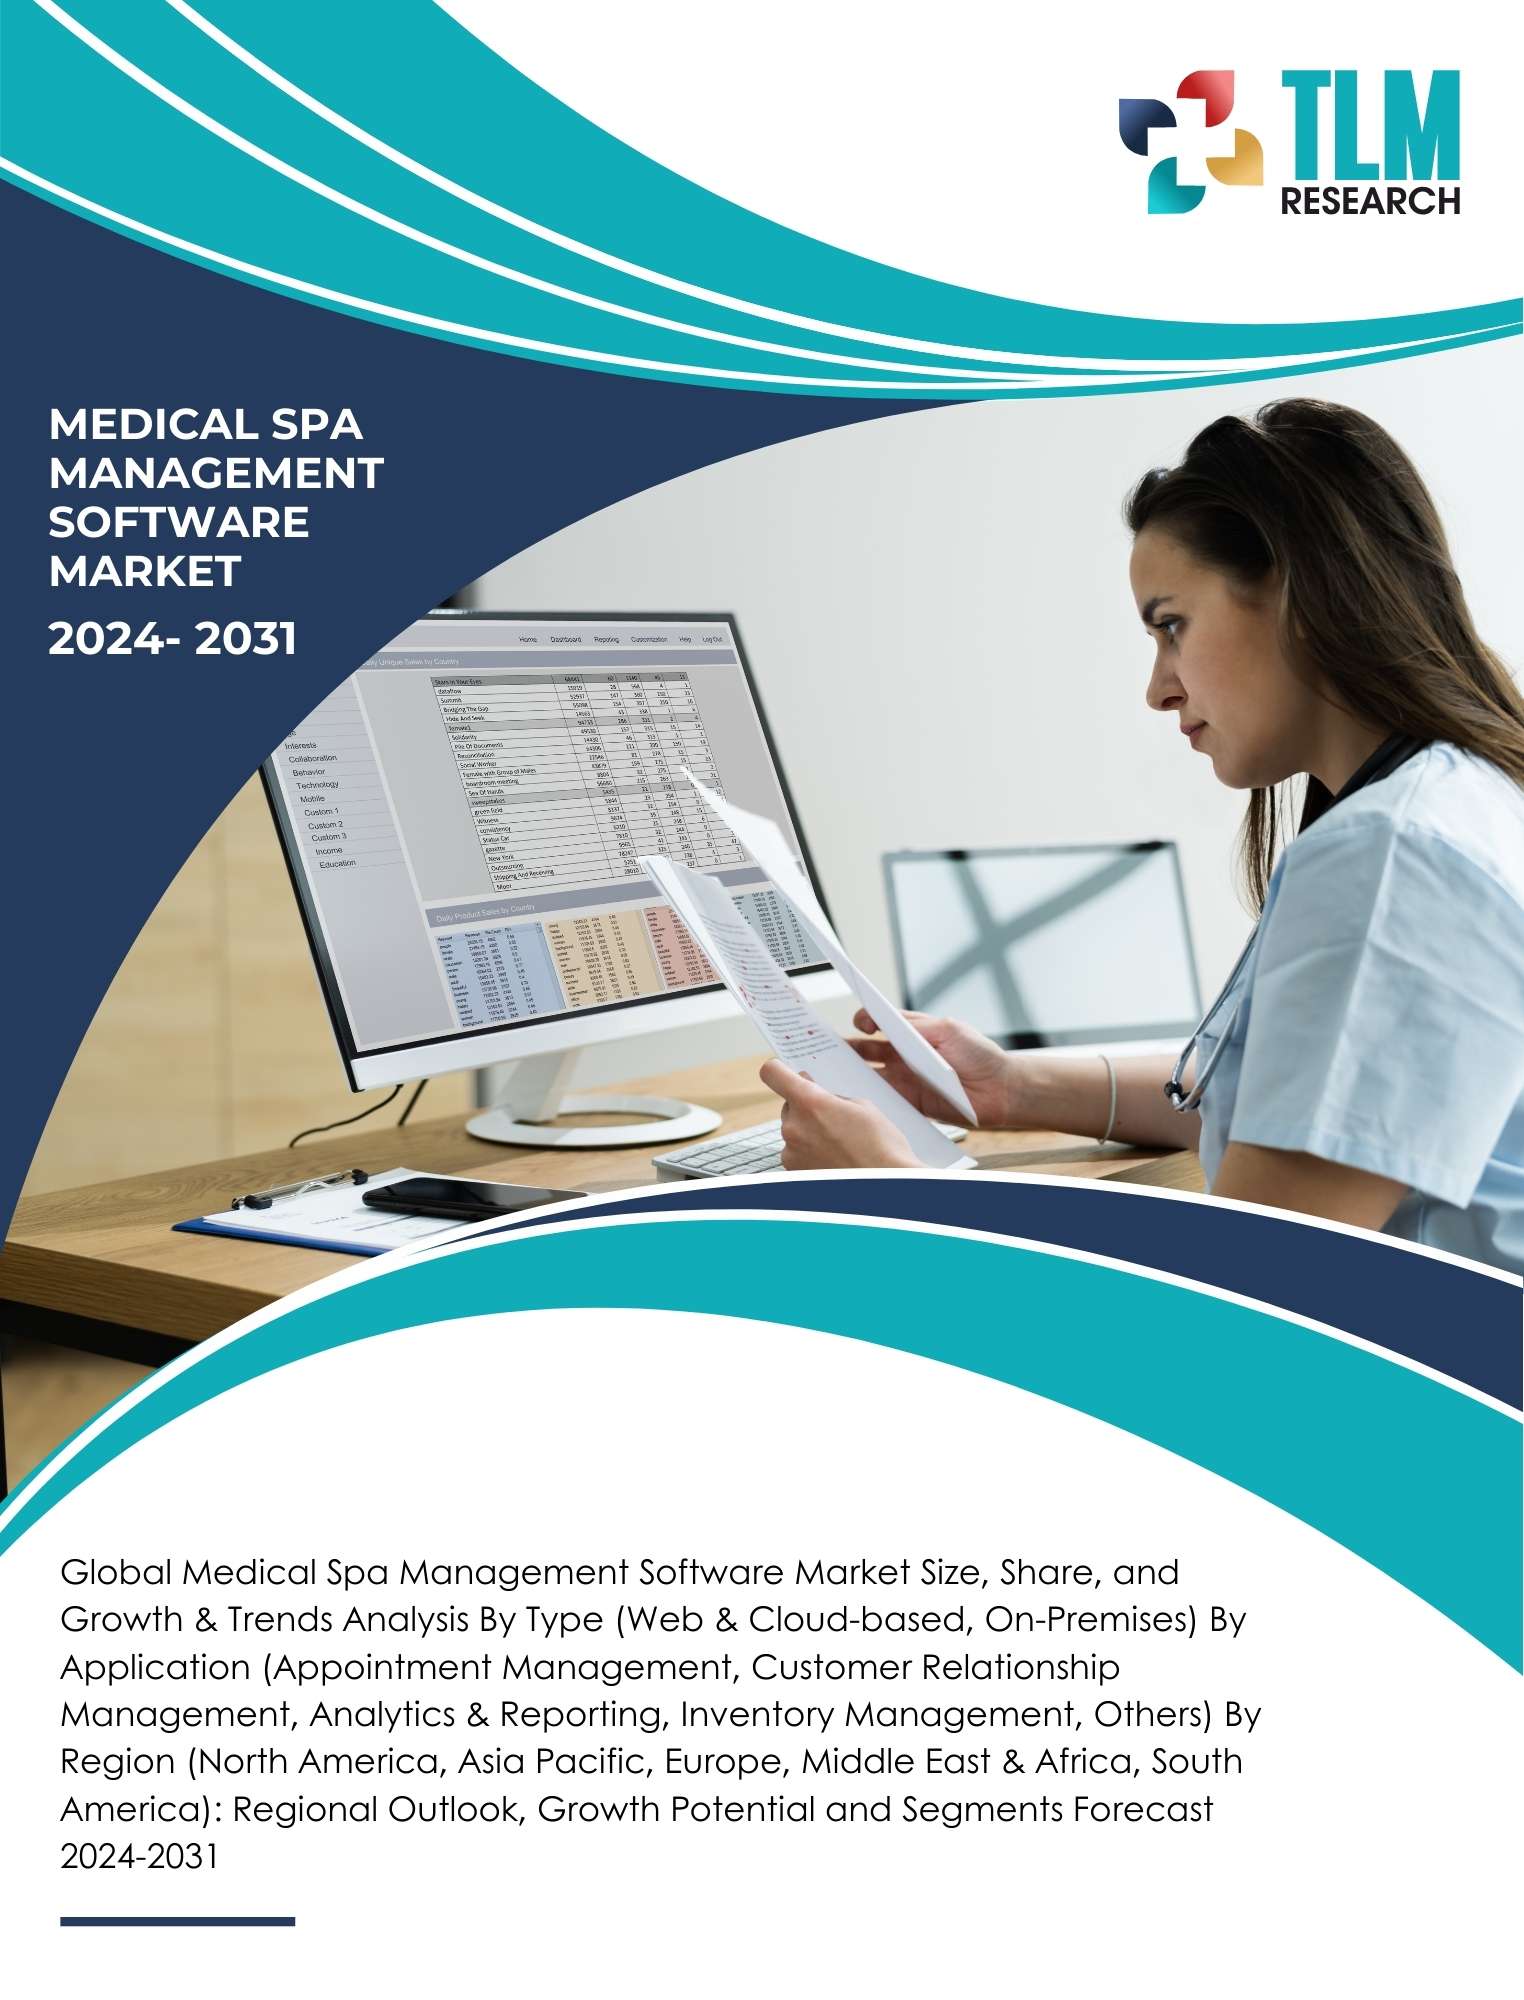 Medical Spa Management Software Market Industry Analysis and Forecast | 2031 | TLM Research